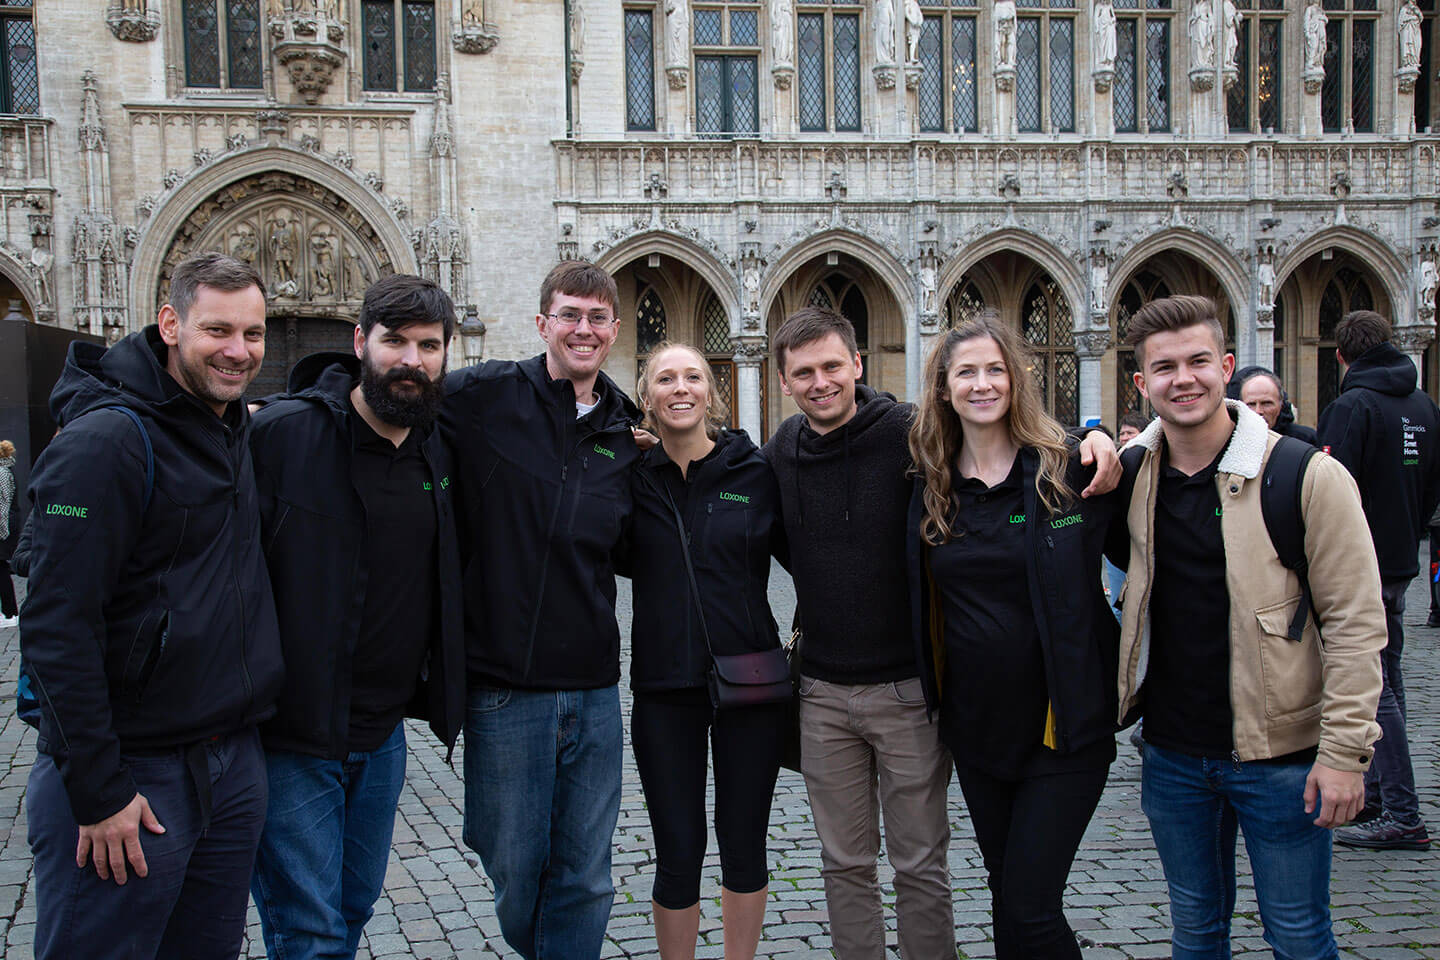 Loxone employees standing together at Grand Place